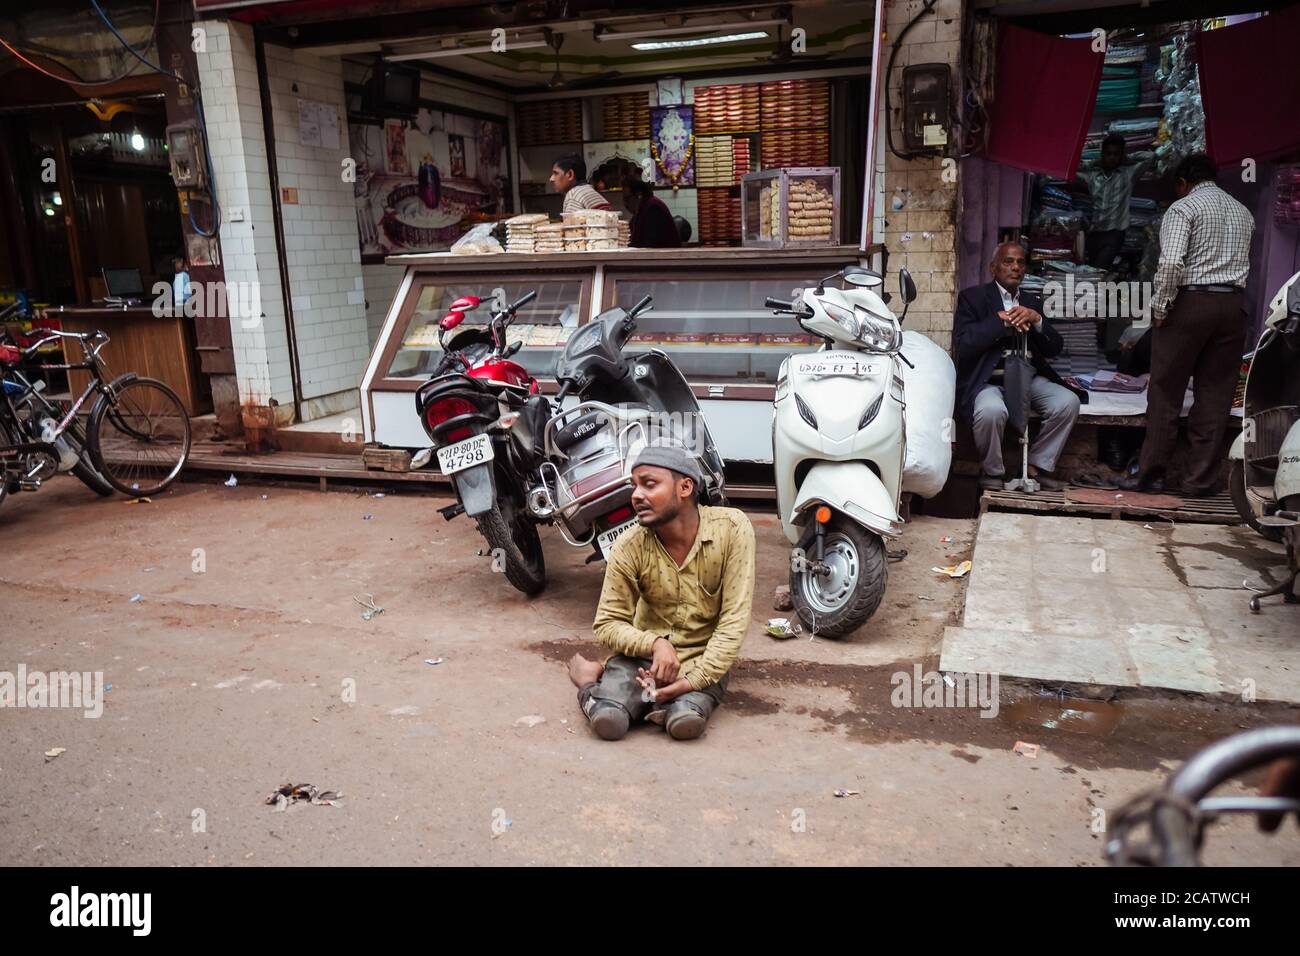 Agra / India - February 22, 2020: young indian man with physical problems asking for money sitting on the street Stock Photo